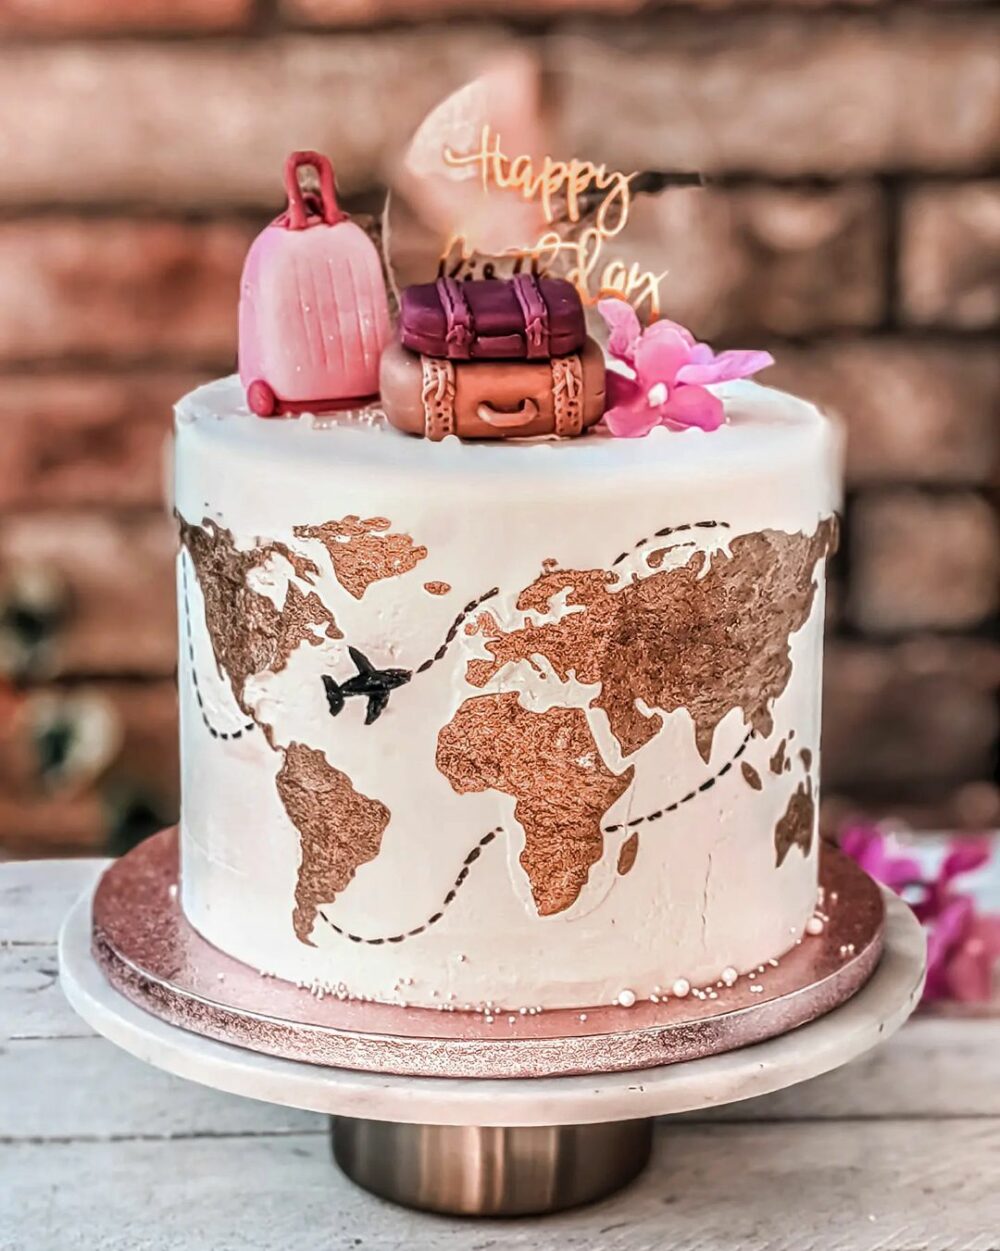 The pink and copper cake is perfect for celebrating a birthday sending well wishes on a new adventure or commemorating a significant travel related achie